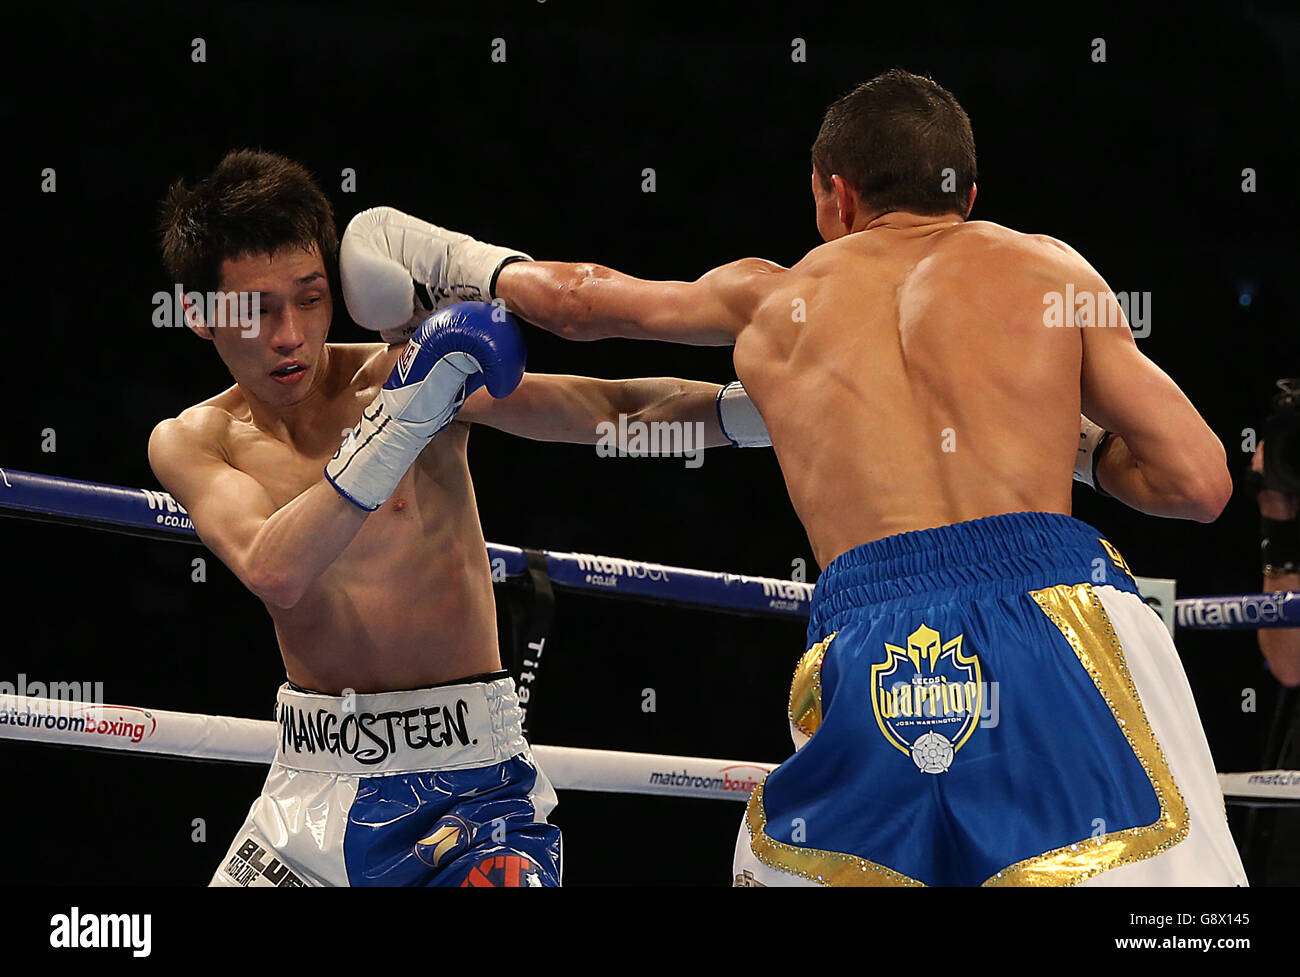 Josh Warrington and Hisashi Amagasa during the WBC International Featherweight Championship bout at the First Direct Arena, Leeds. Stock Photo